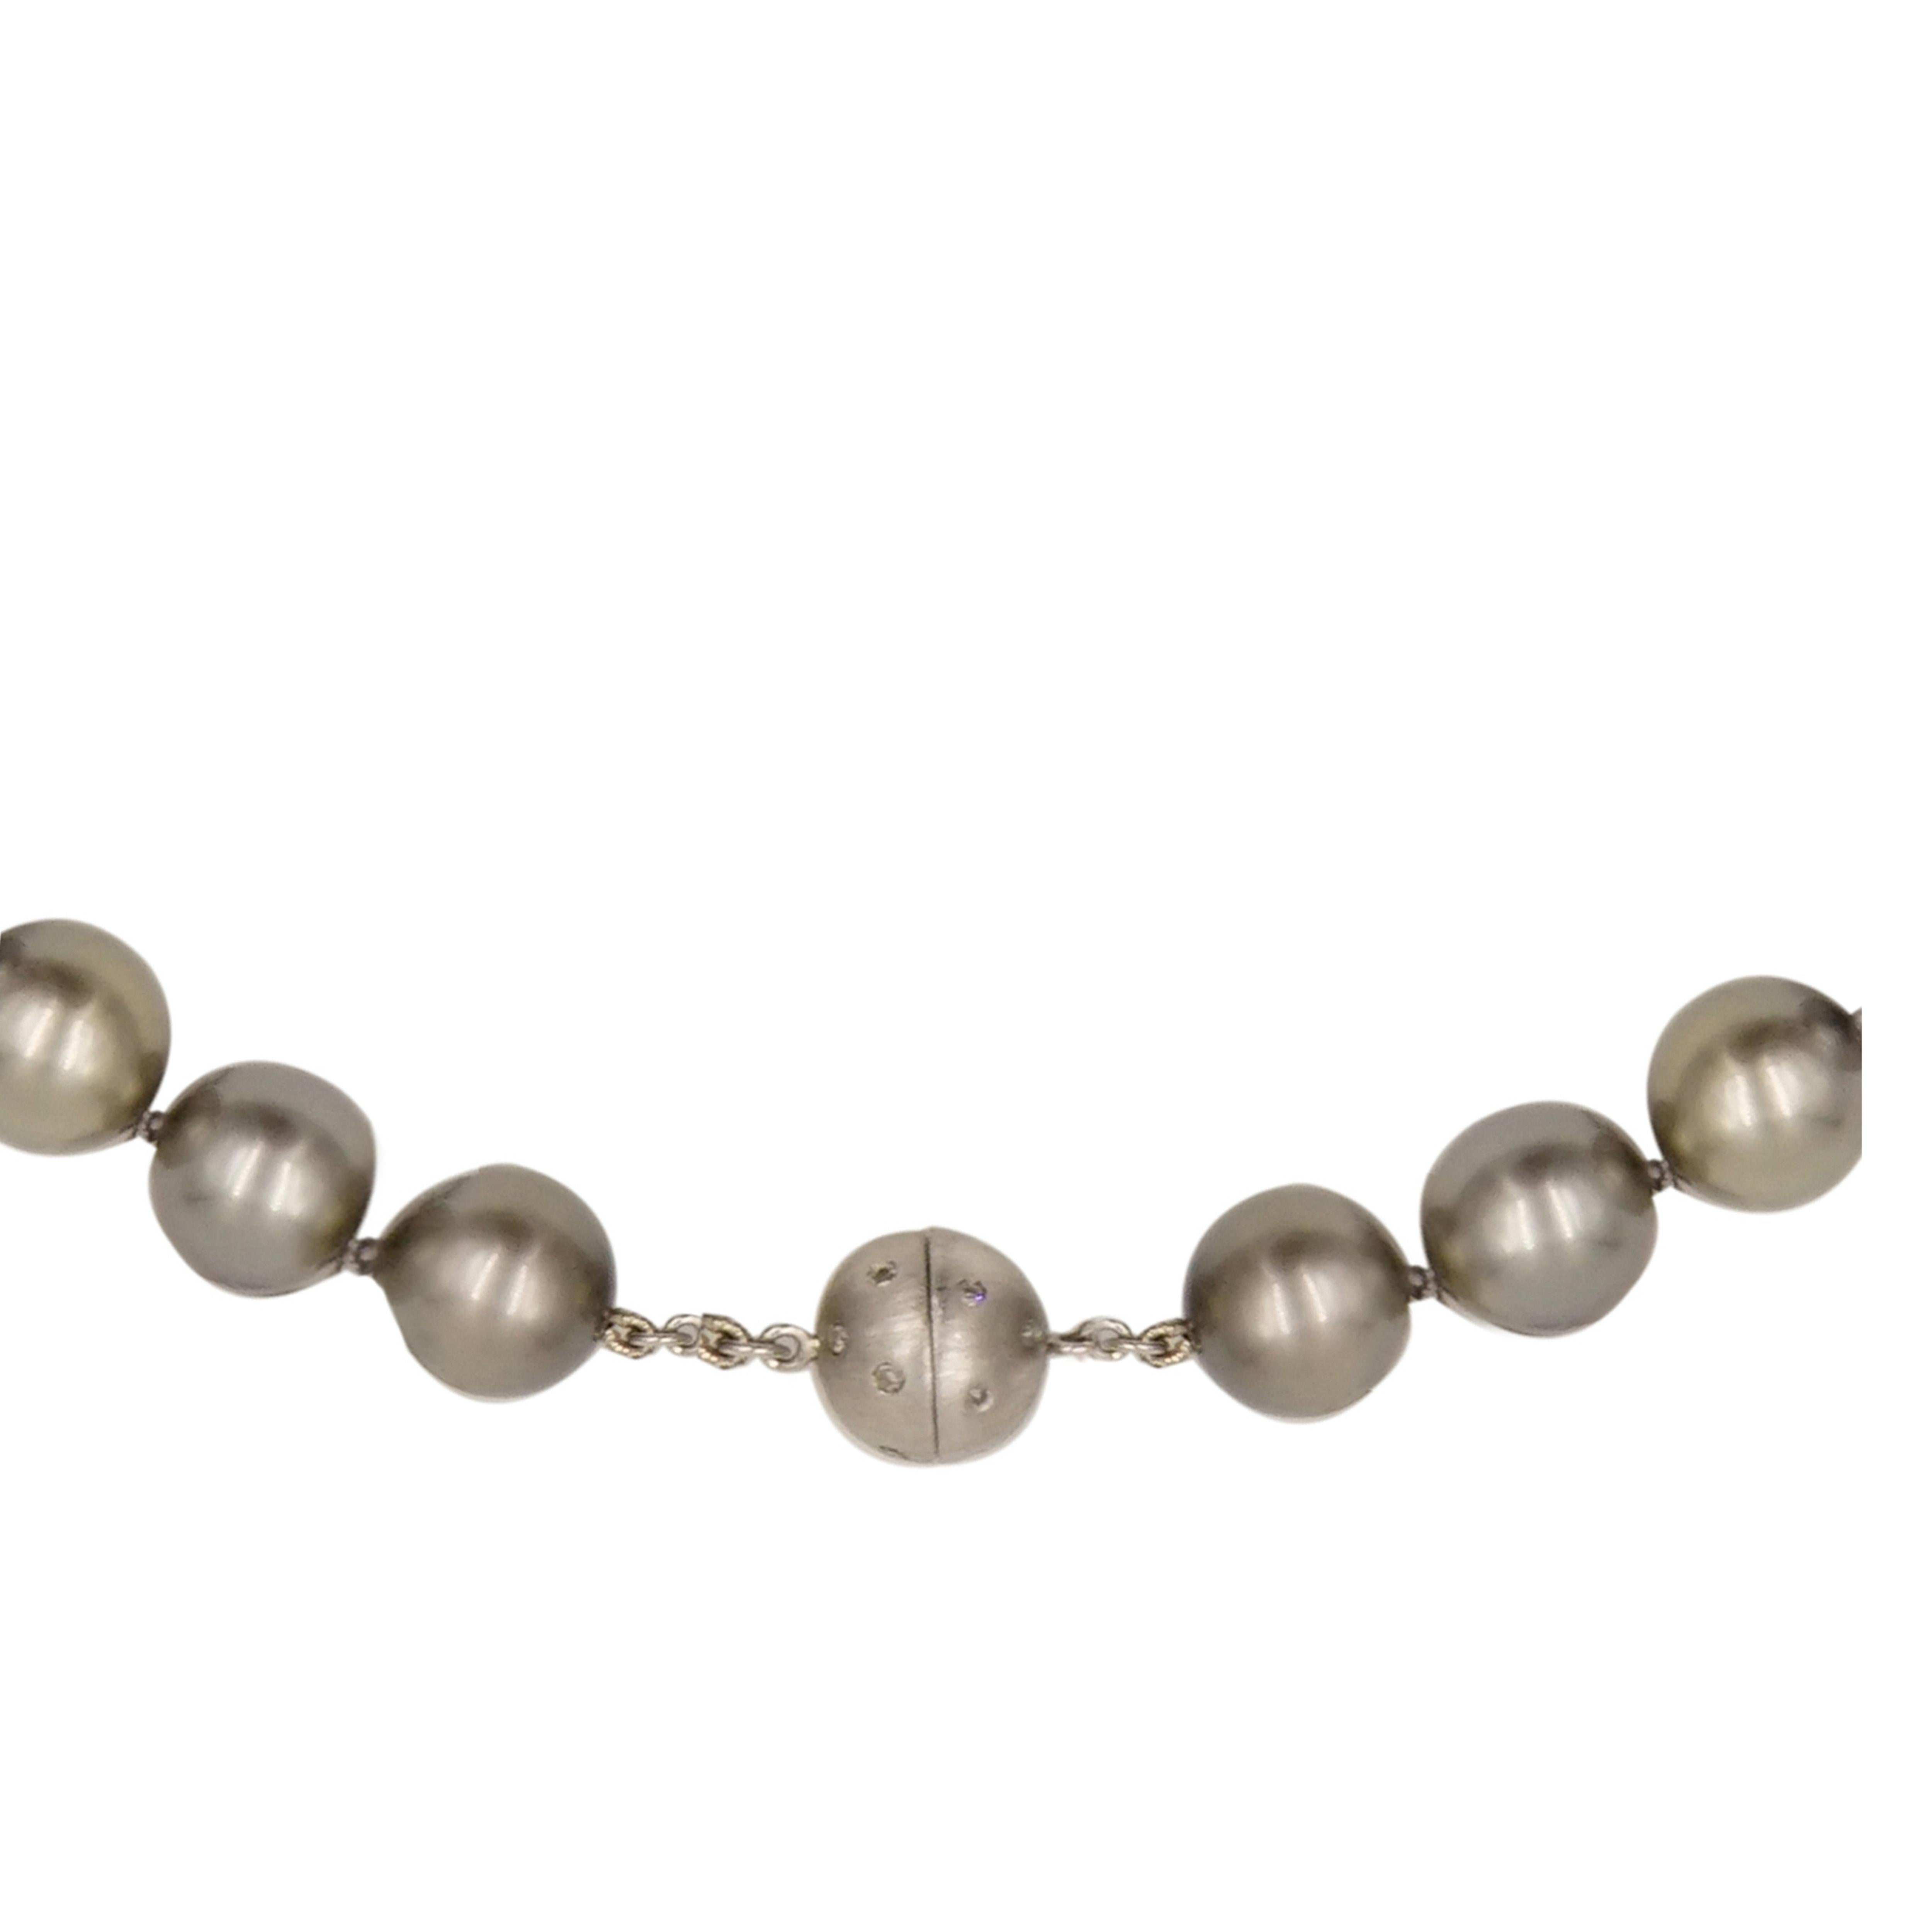 Modern Gray/Silver South Sea Pearl Necklace